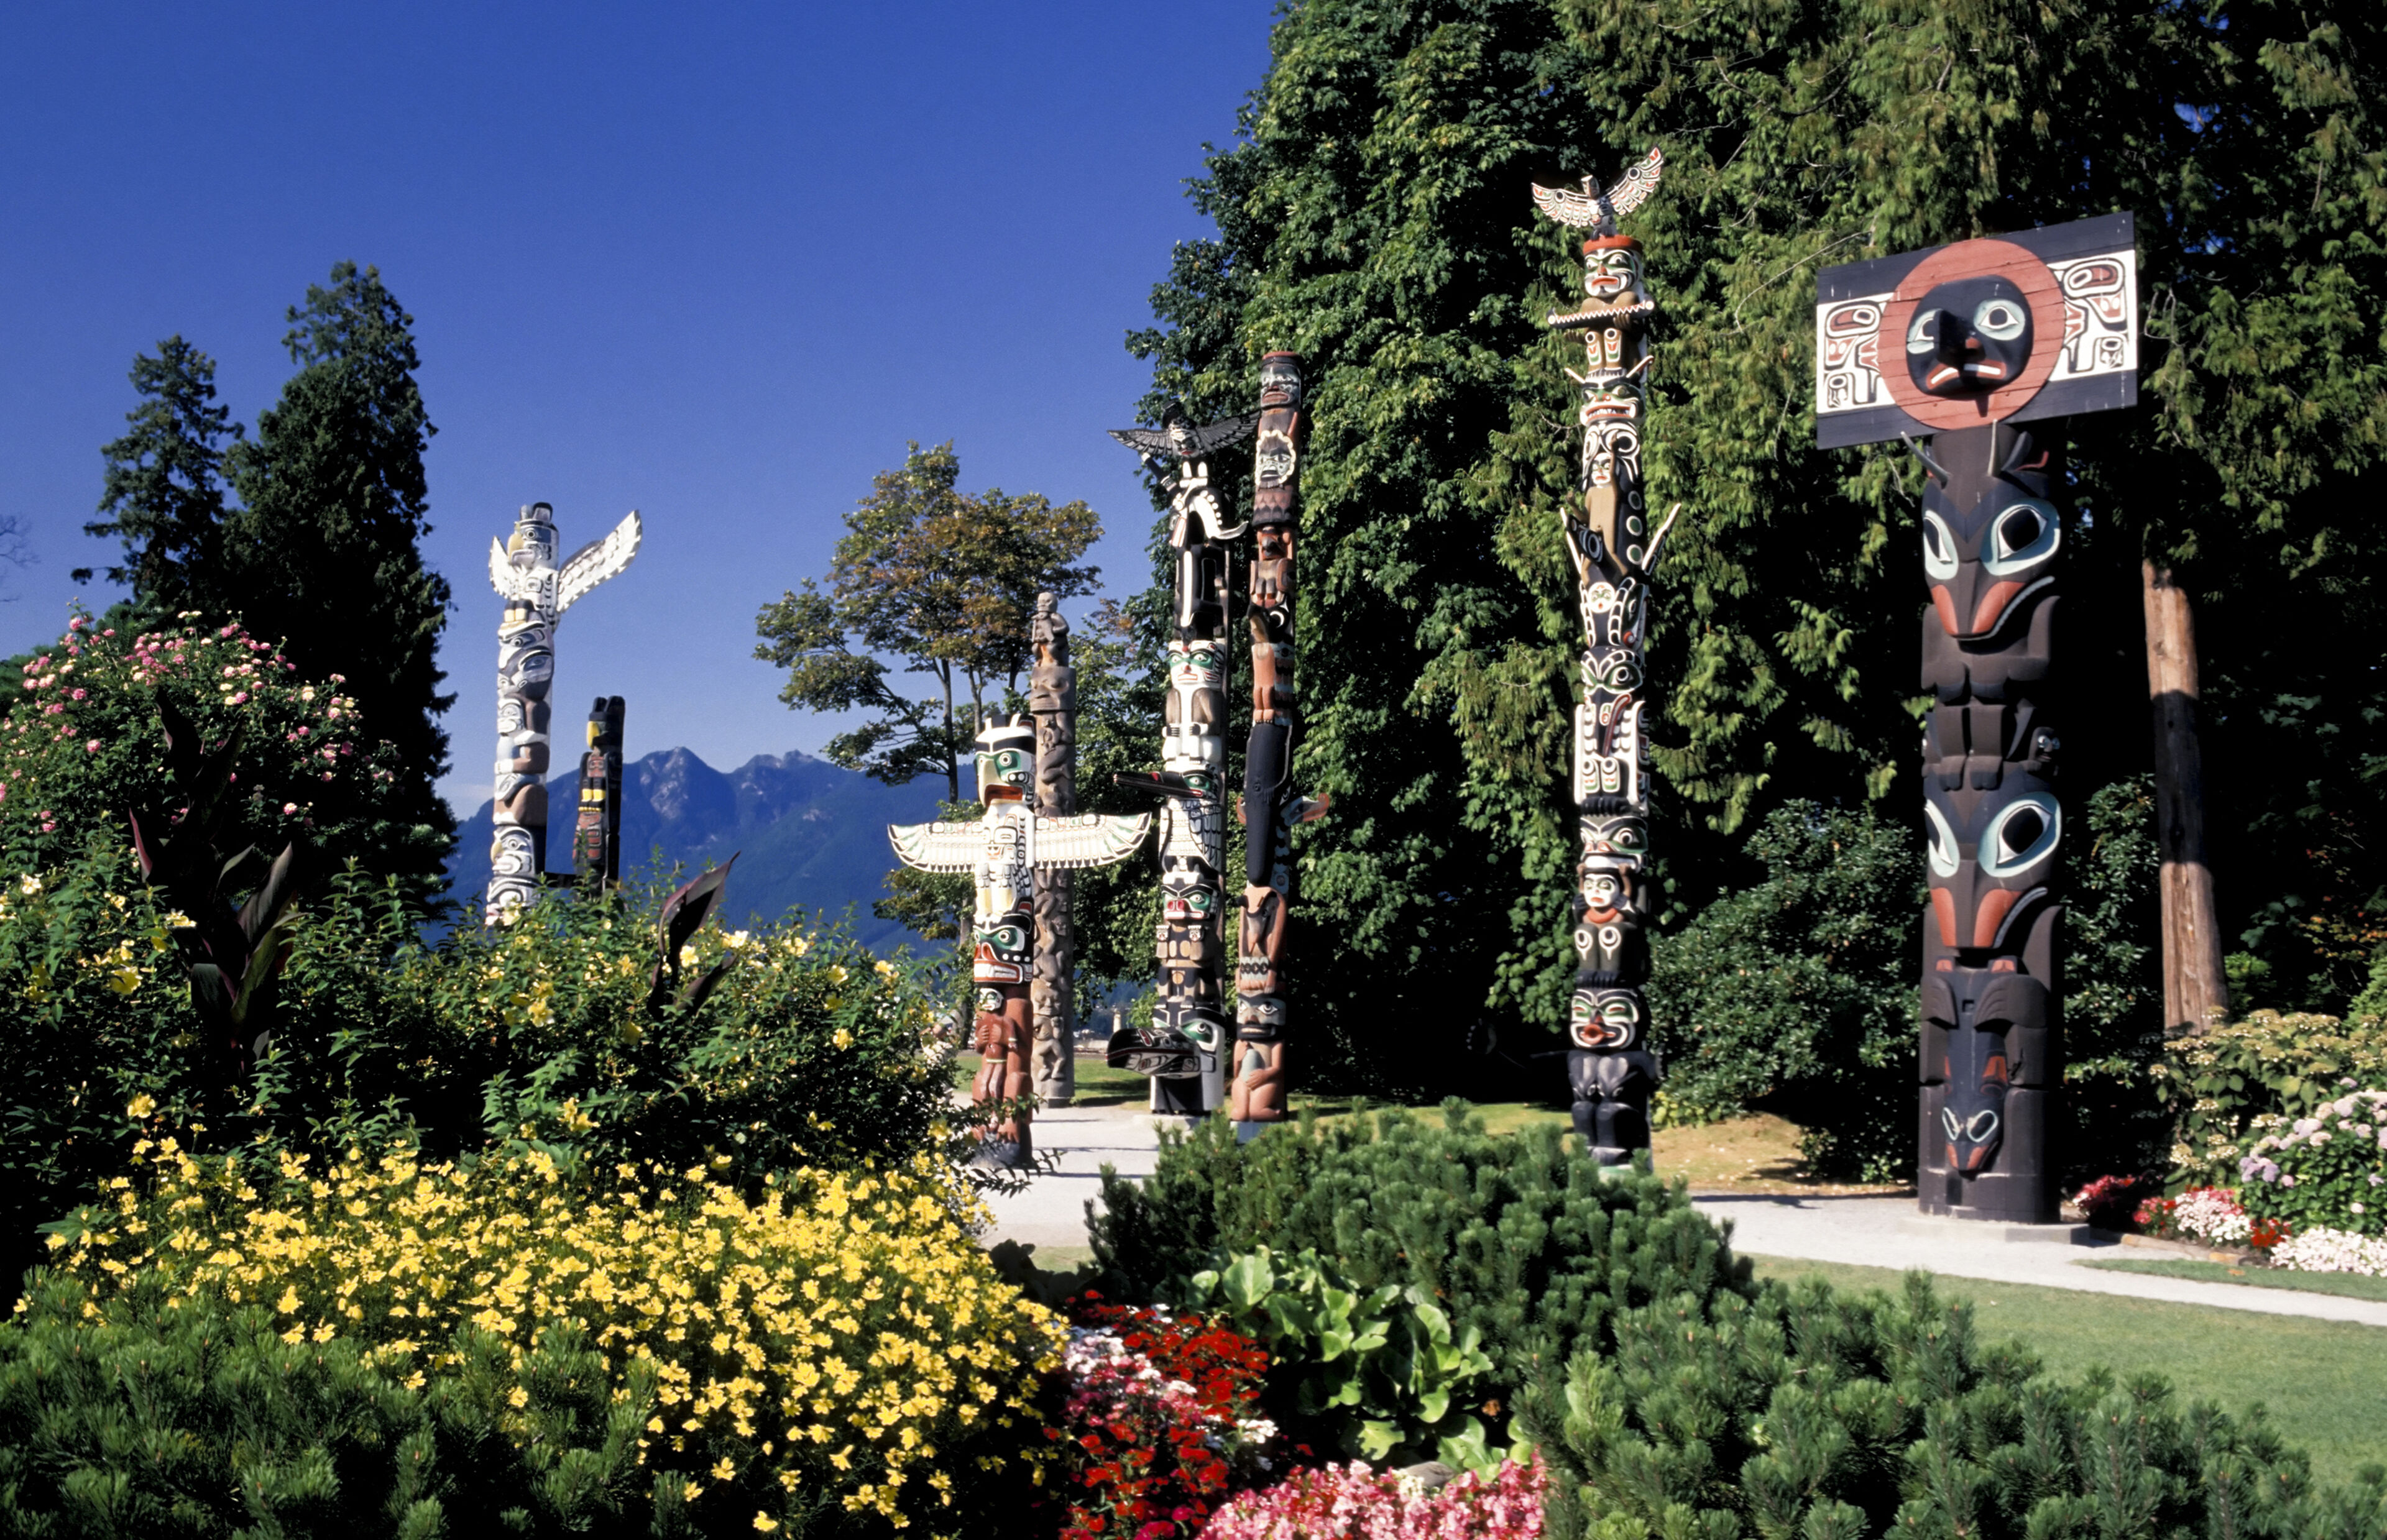 A row of intricately carved totem poles stands majestically in a blooming garden with mountain scenery in the background.